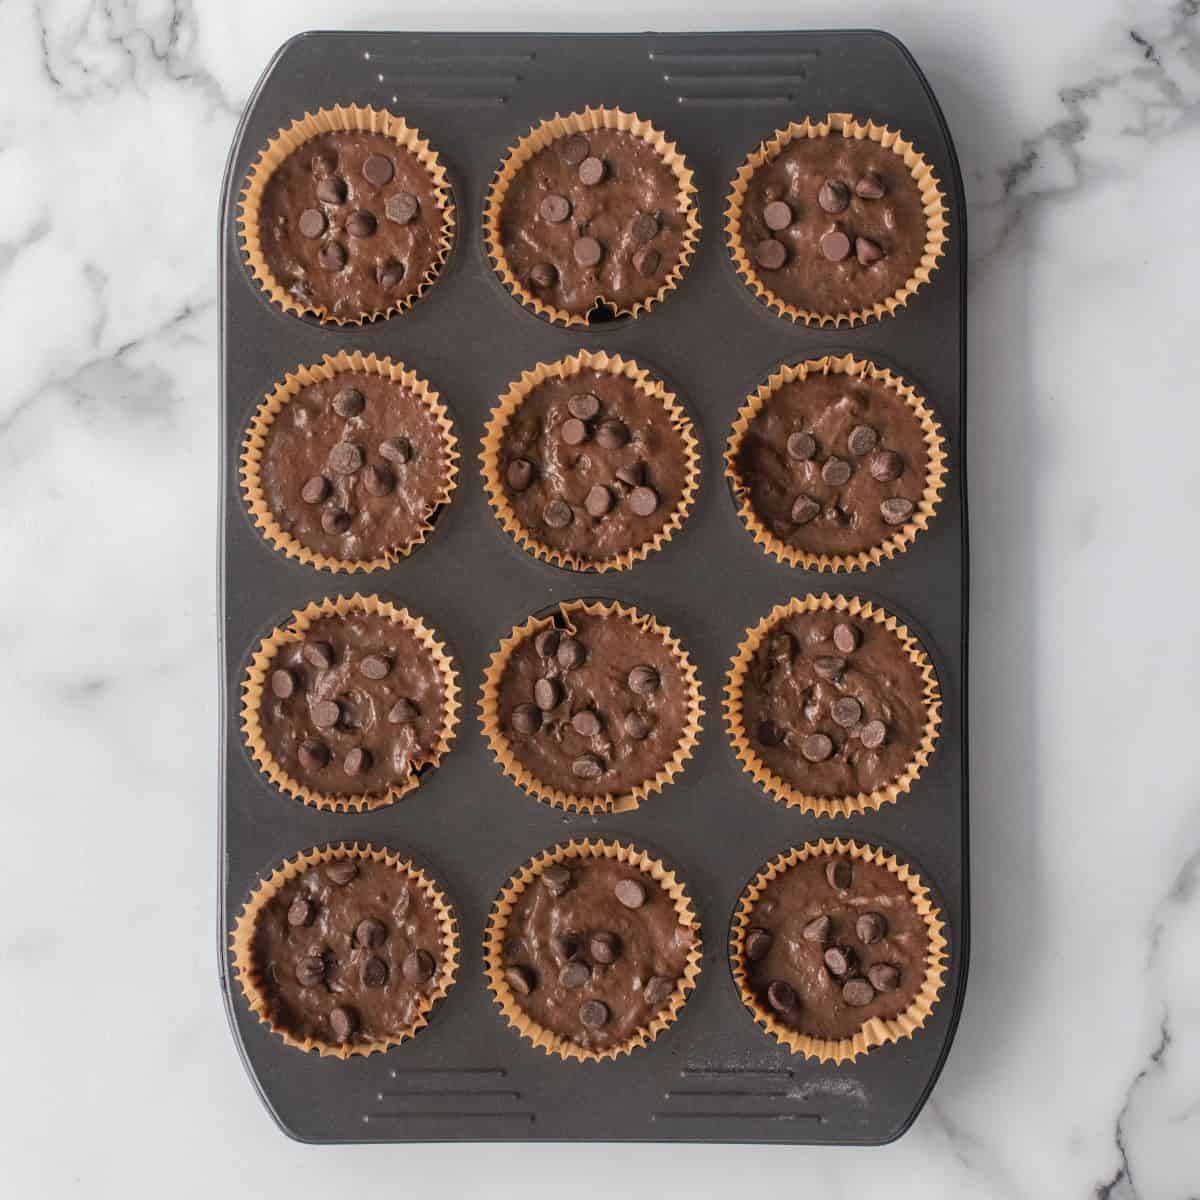 Muffin mixture in lined muffin tin with chocolate chips dropped on top of each one.